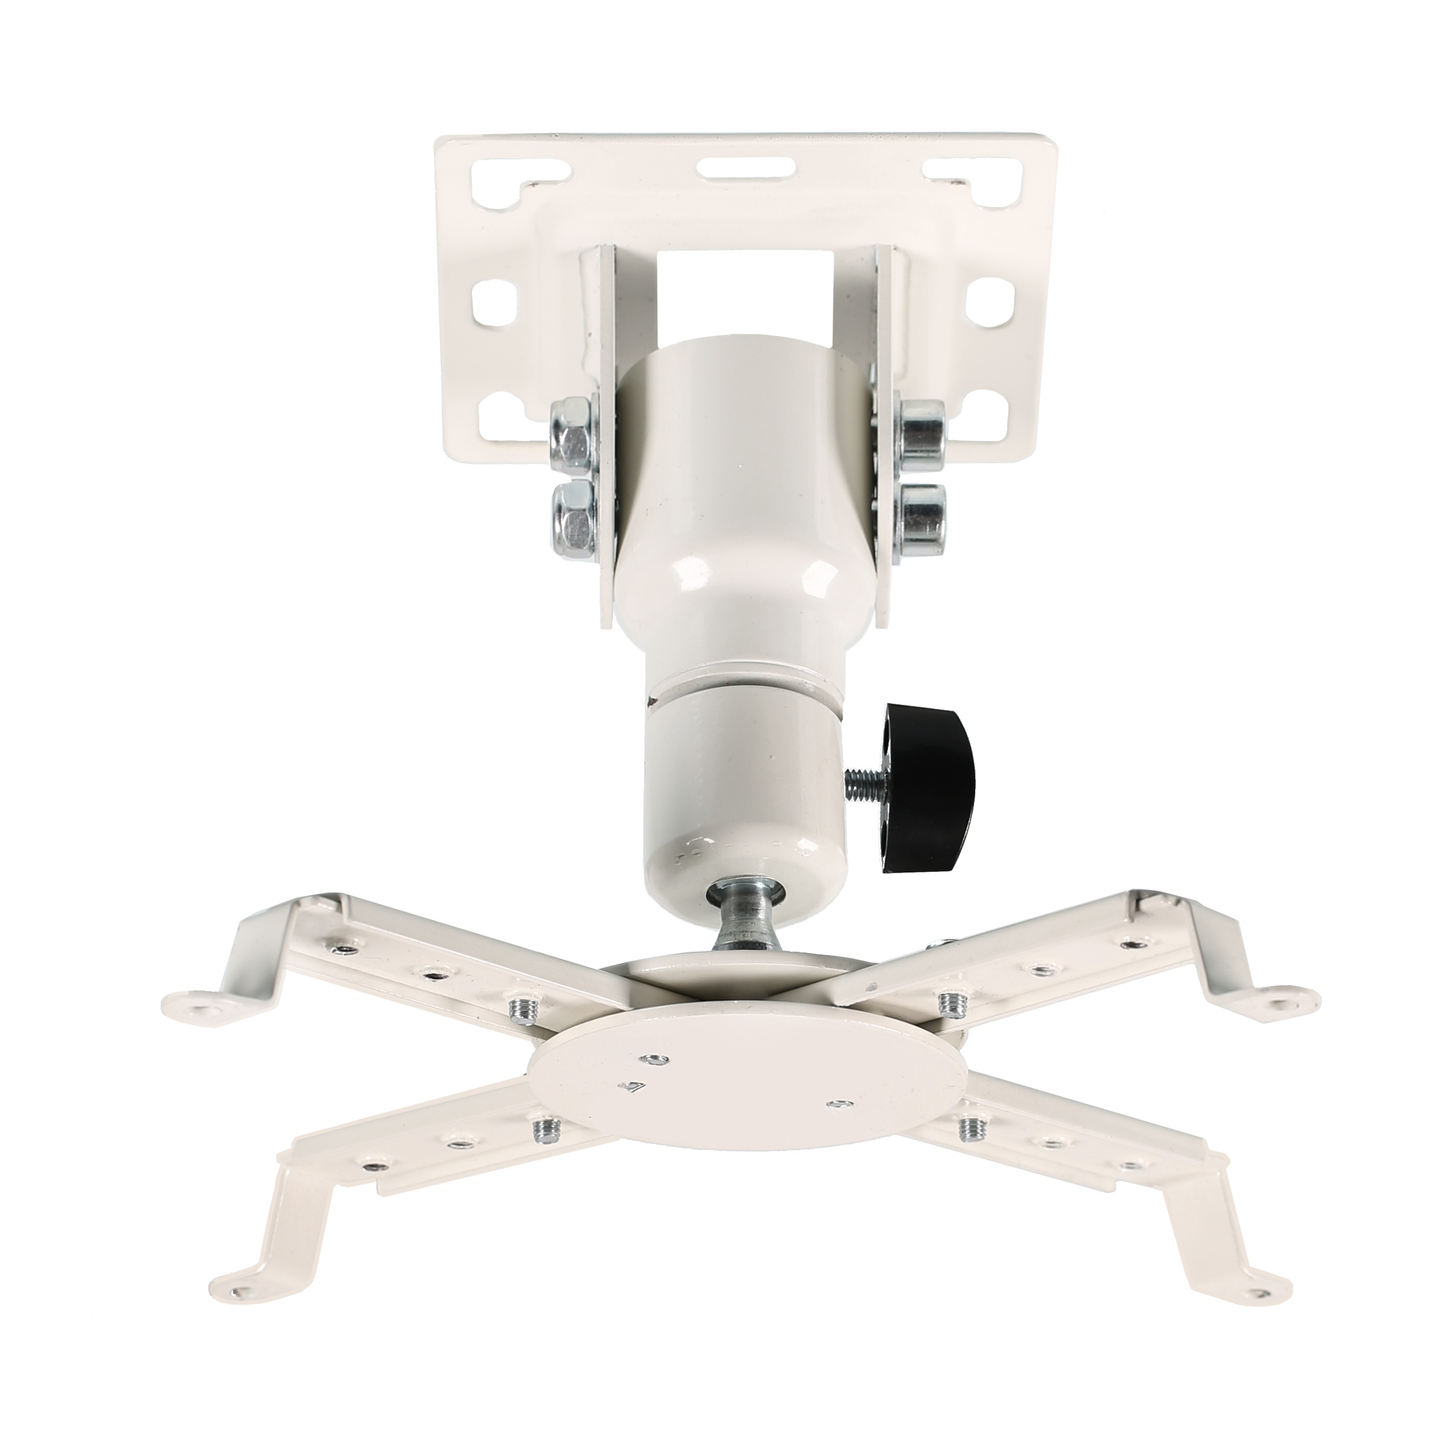 Cheetah Mounts APMEW Universal Projector Ceiling Mount Includes an Adjustable Extension Pole and a Twisted Veins 15' HDMI Cable